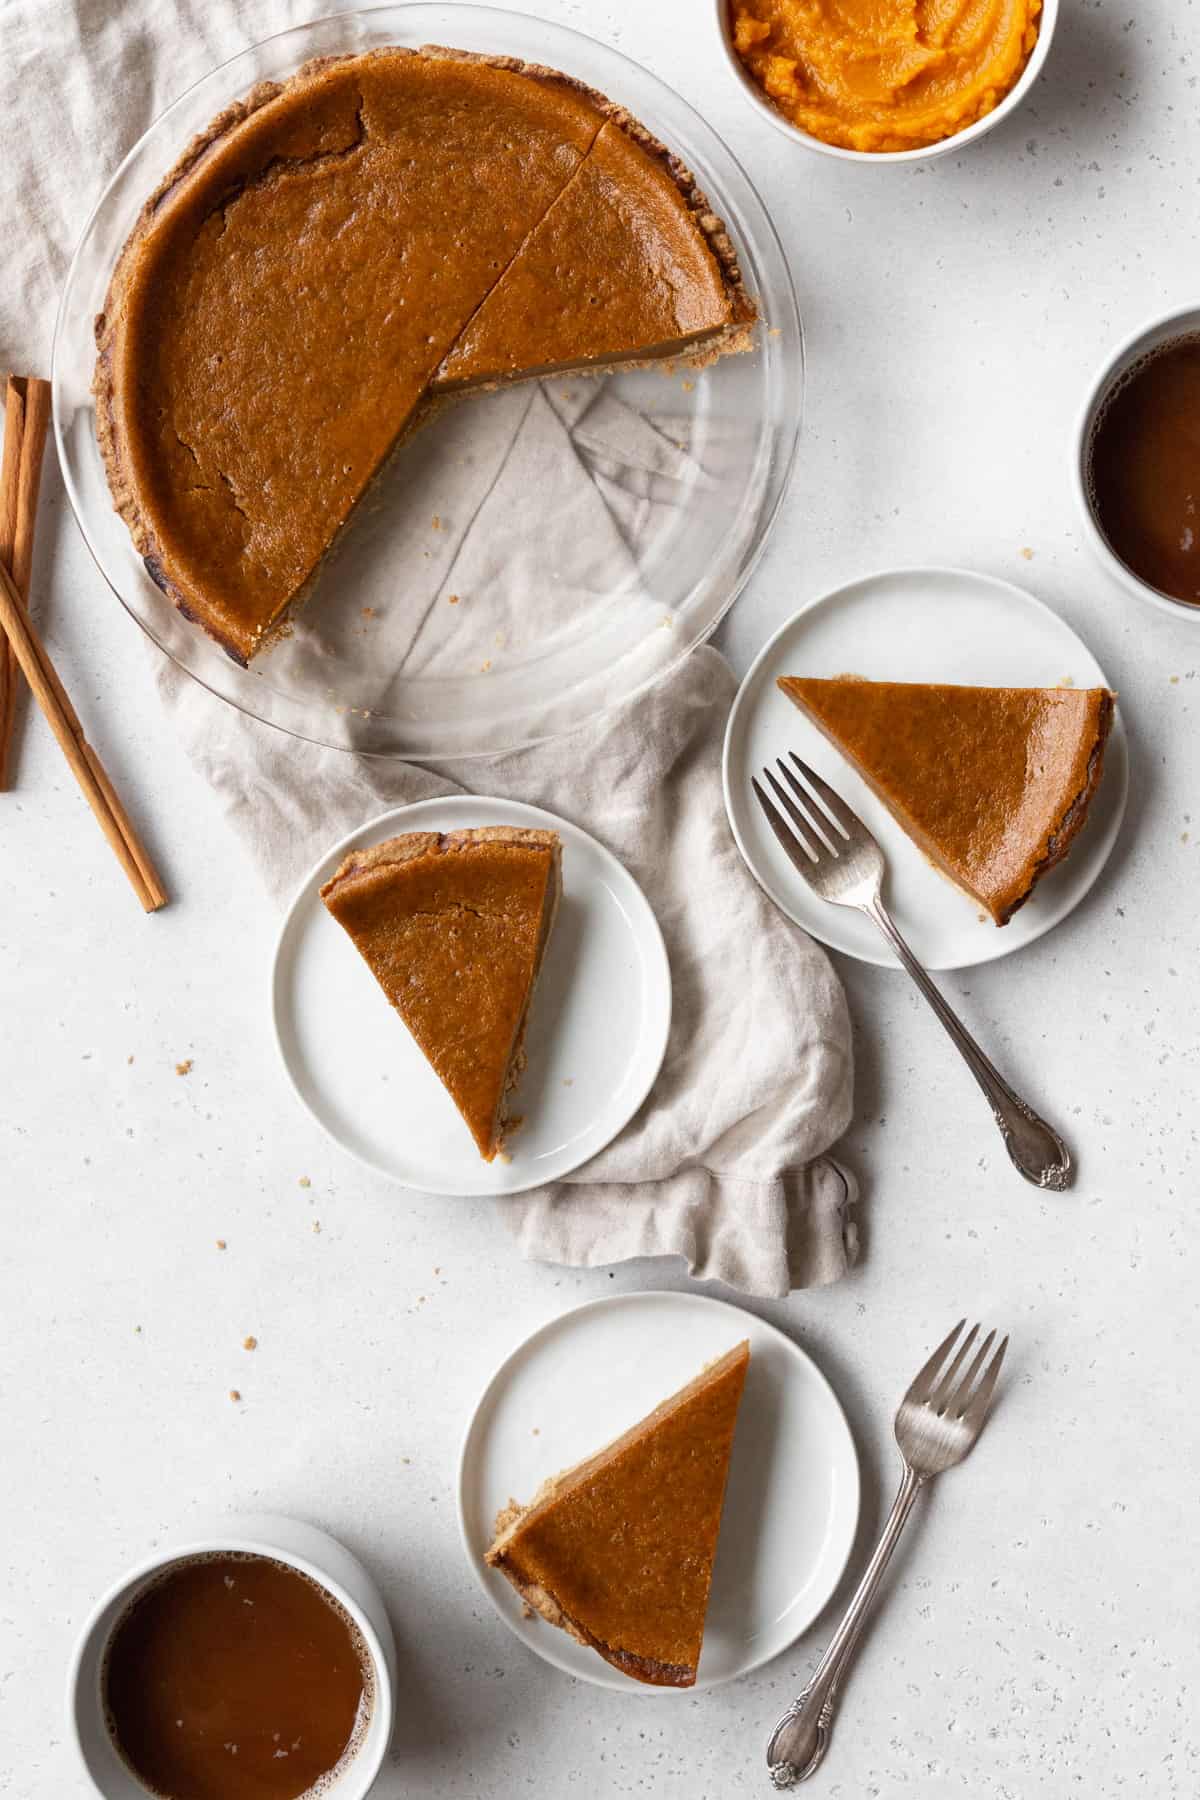 An egg free pumpkin pie in a glass pie plate with three slices on small white plates scattered on a white surface, with forks and mugs of coffee placed around them.